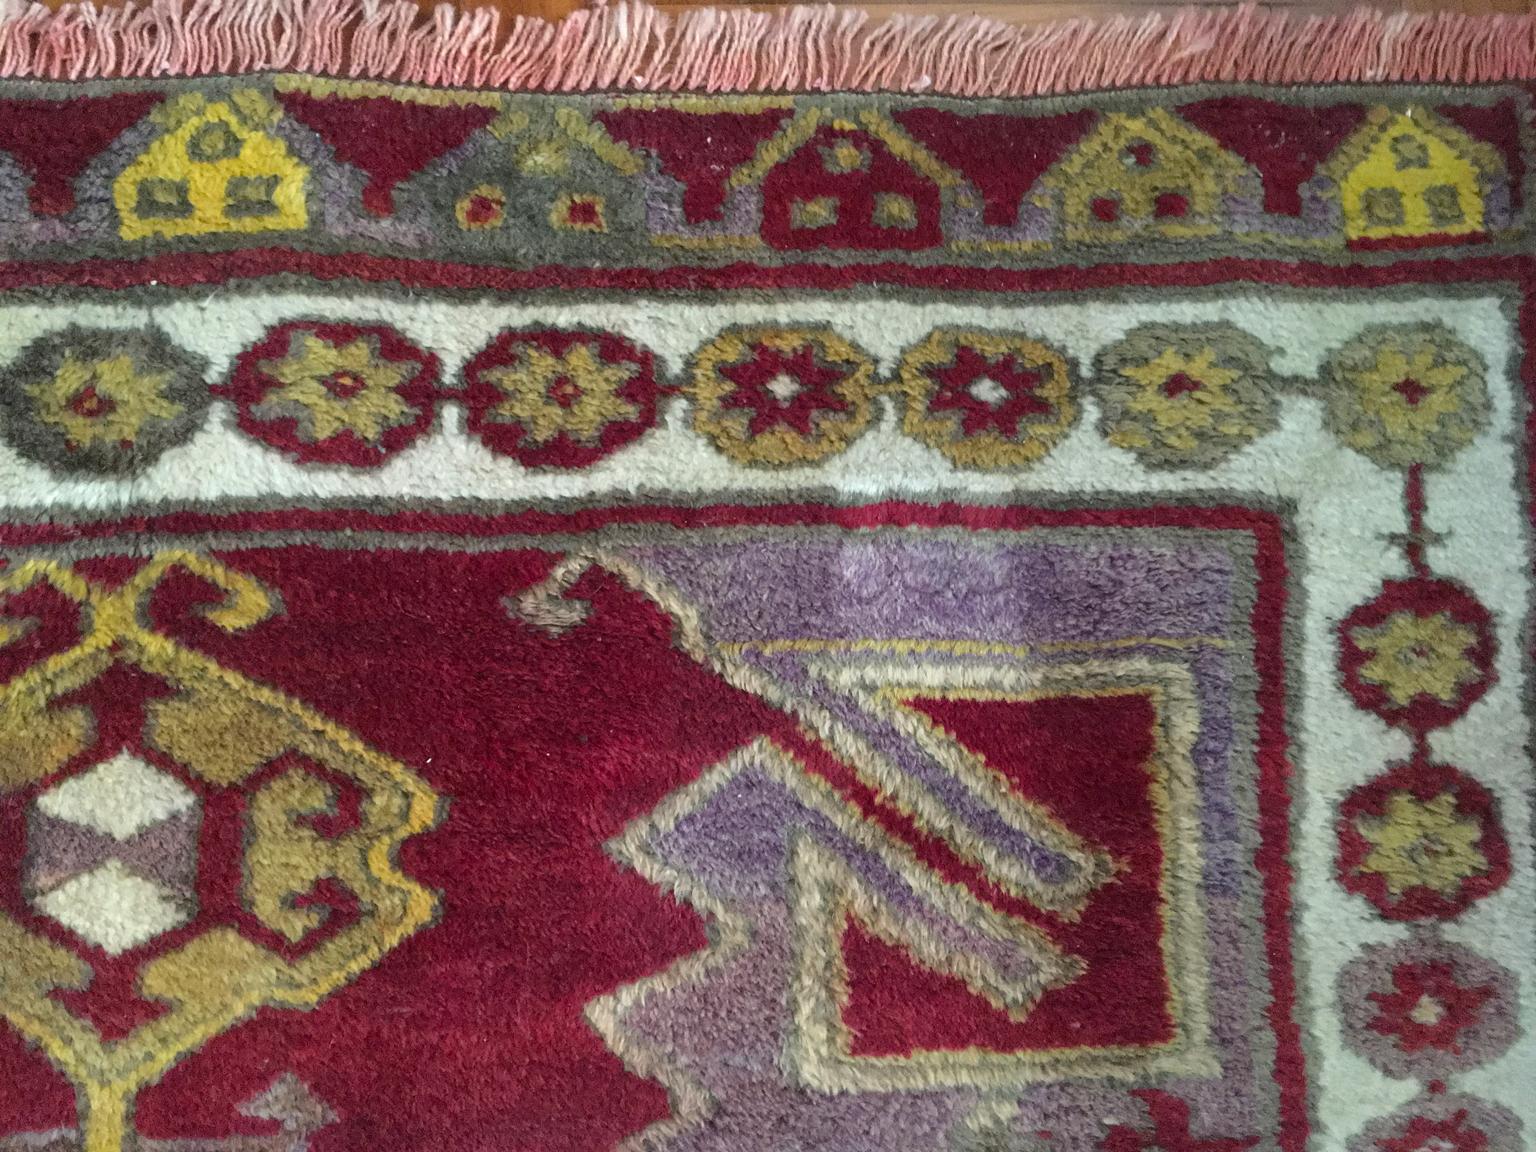 This is wool rug hand made in Caucasian countries. The geometrical drawings  and the fully colors used, they make it a very stunning piece to put in every room of your home.  The craftsmanship of the rug is visible in the variations and irregularity